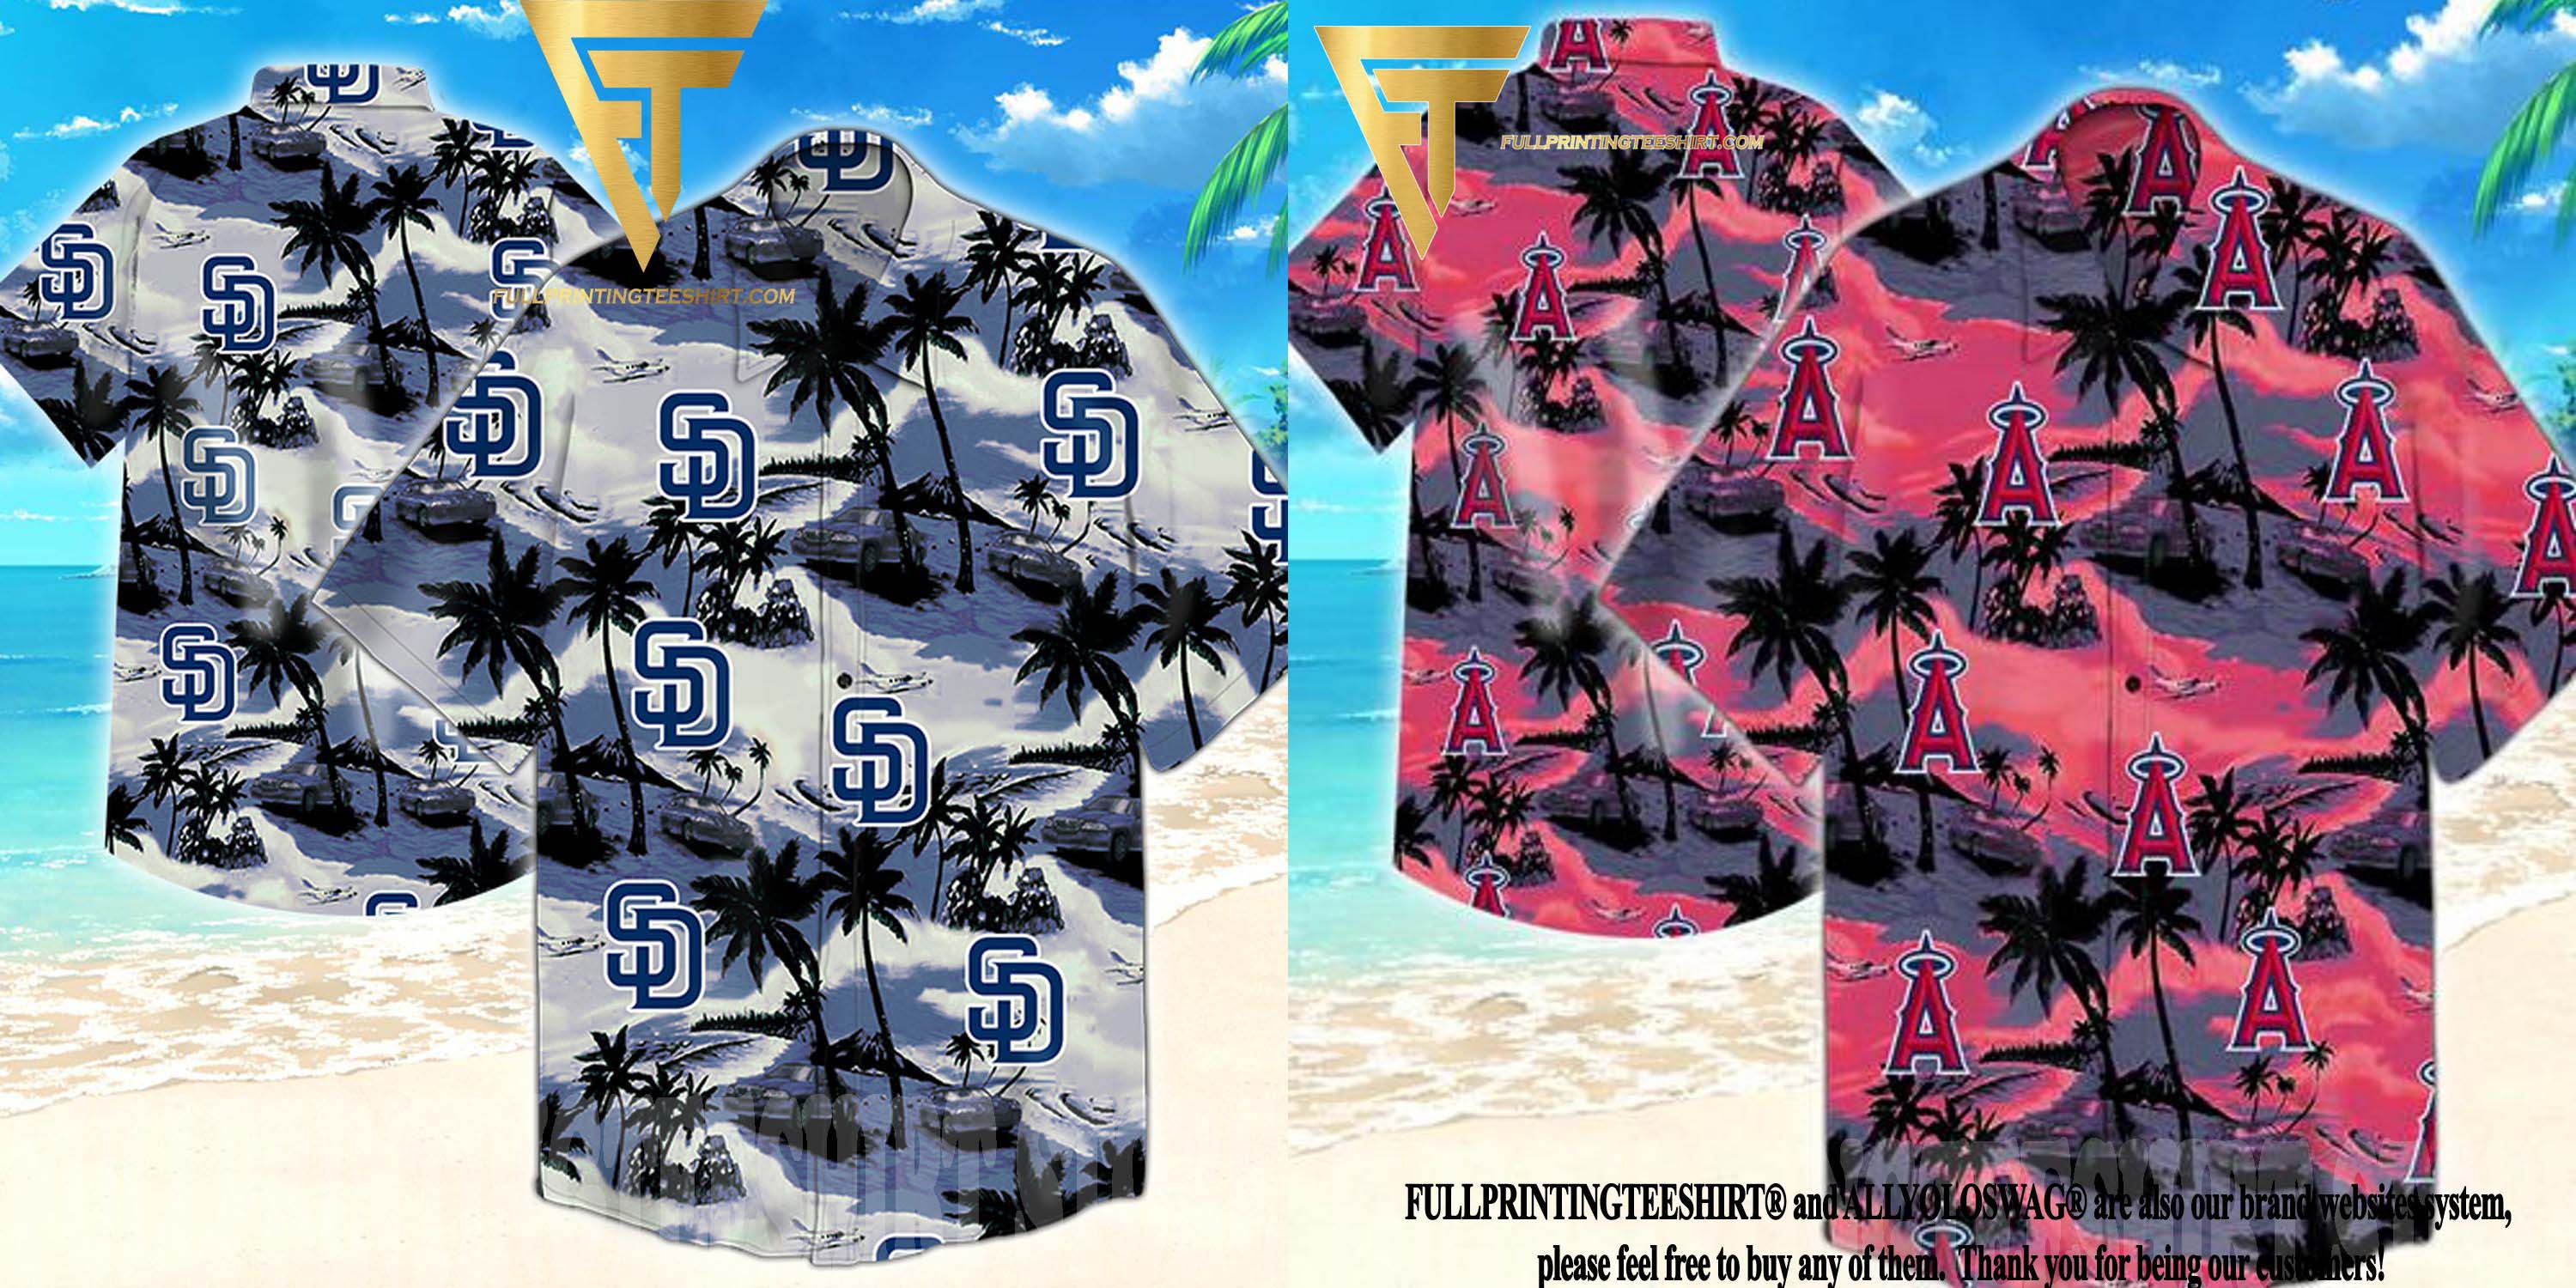 San Diego Padres vs Los Angeles Angels - What do you think of these 2 teams?